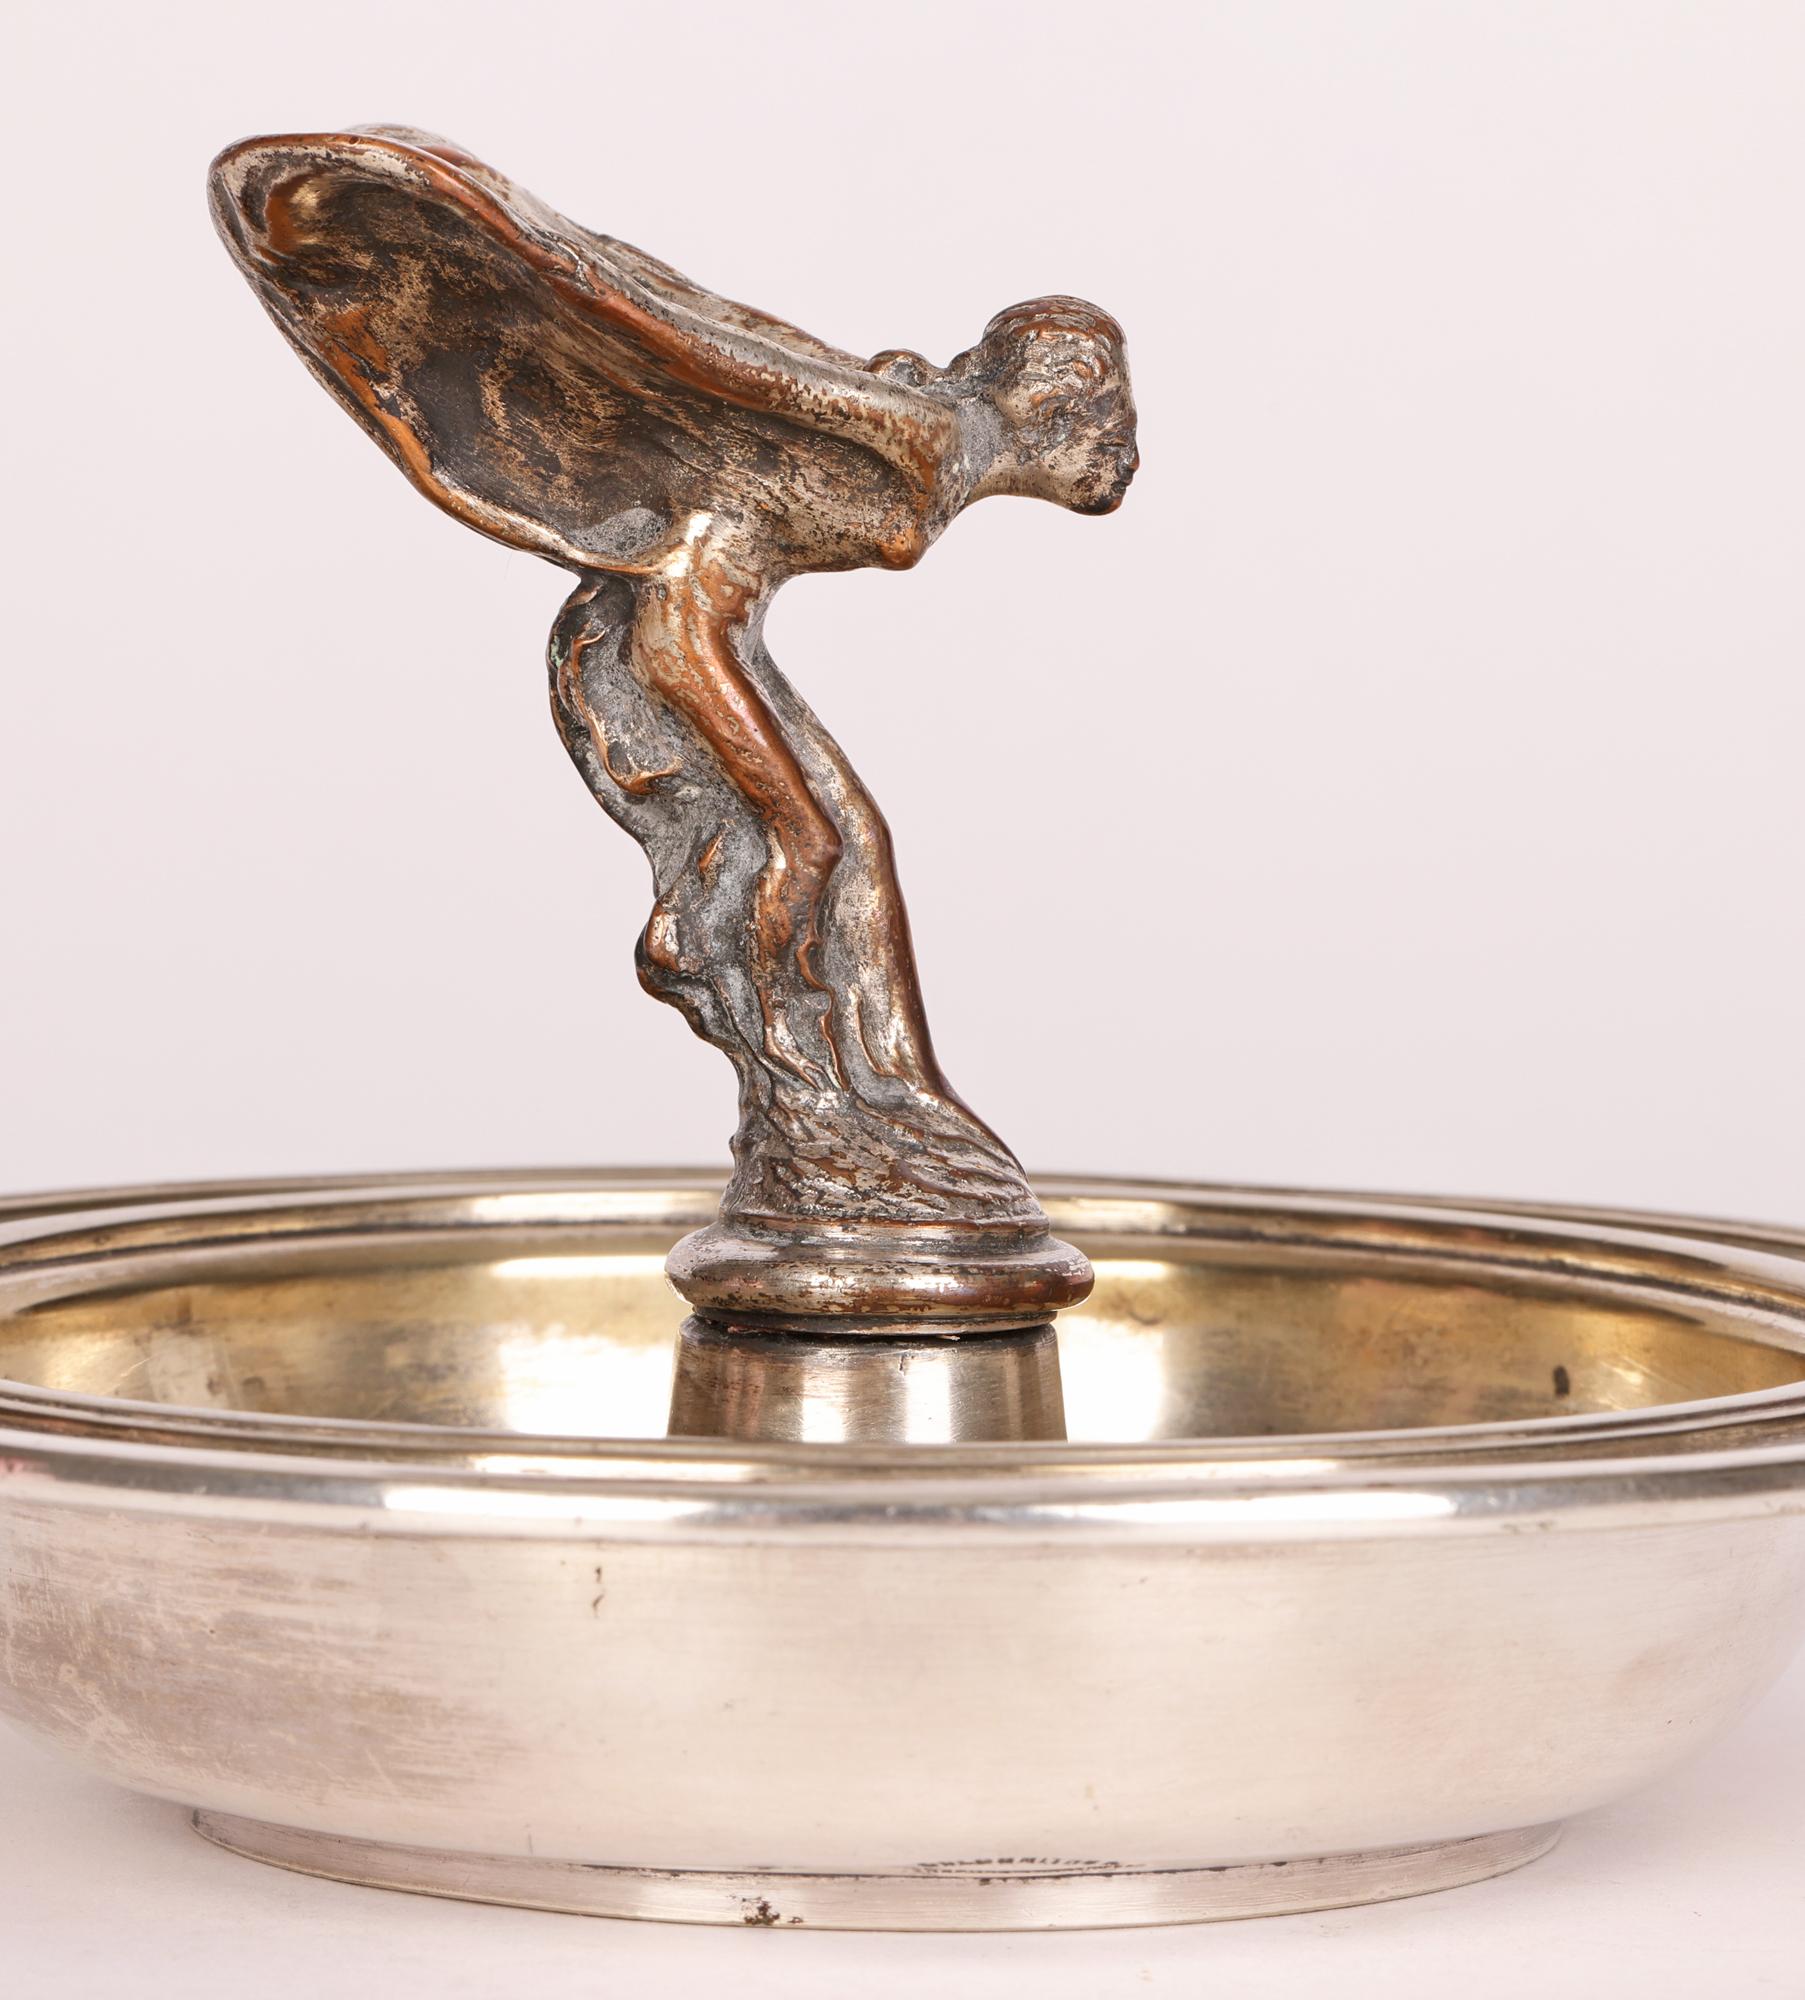 A rare and unusual Goldsmiths & Silversmiths Company, London silver plated Rolls Royce presentation dish mounted centrally with the Spirit of Ecstasy and dating from around 1915. This good quality dish, possibly intended as an ashtray, is heavily